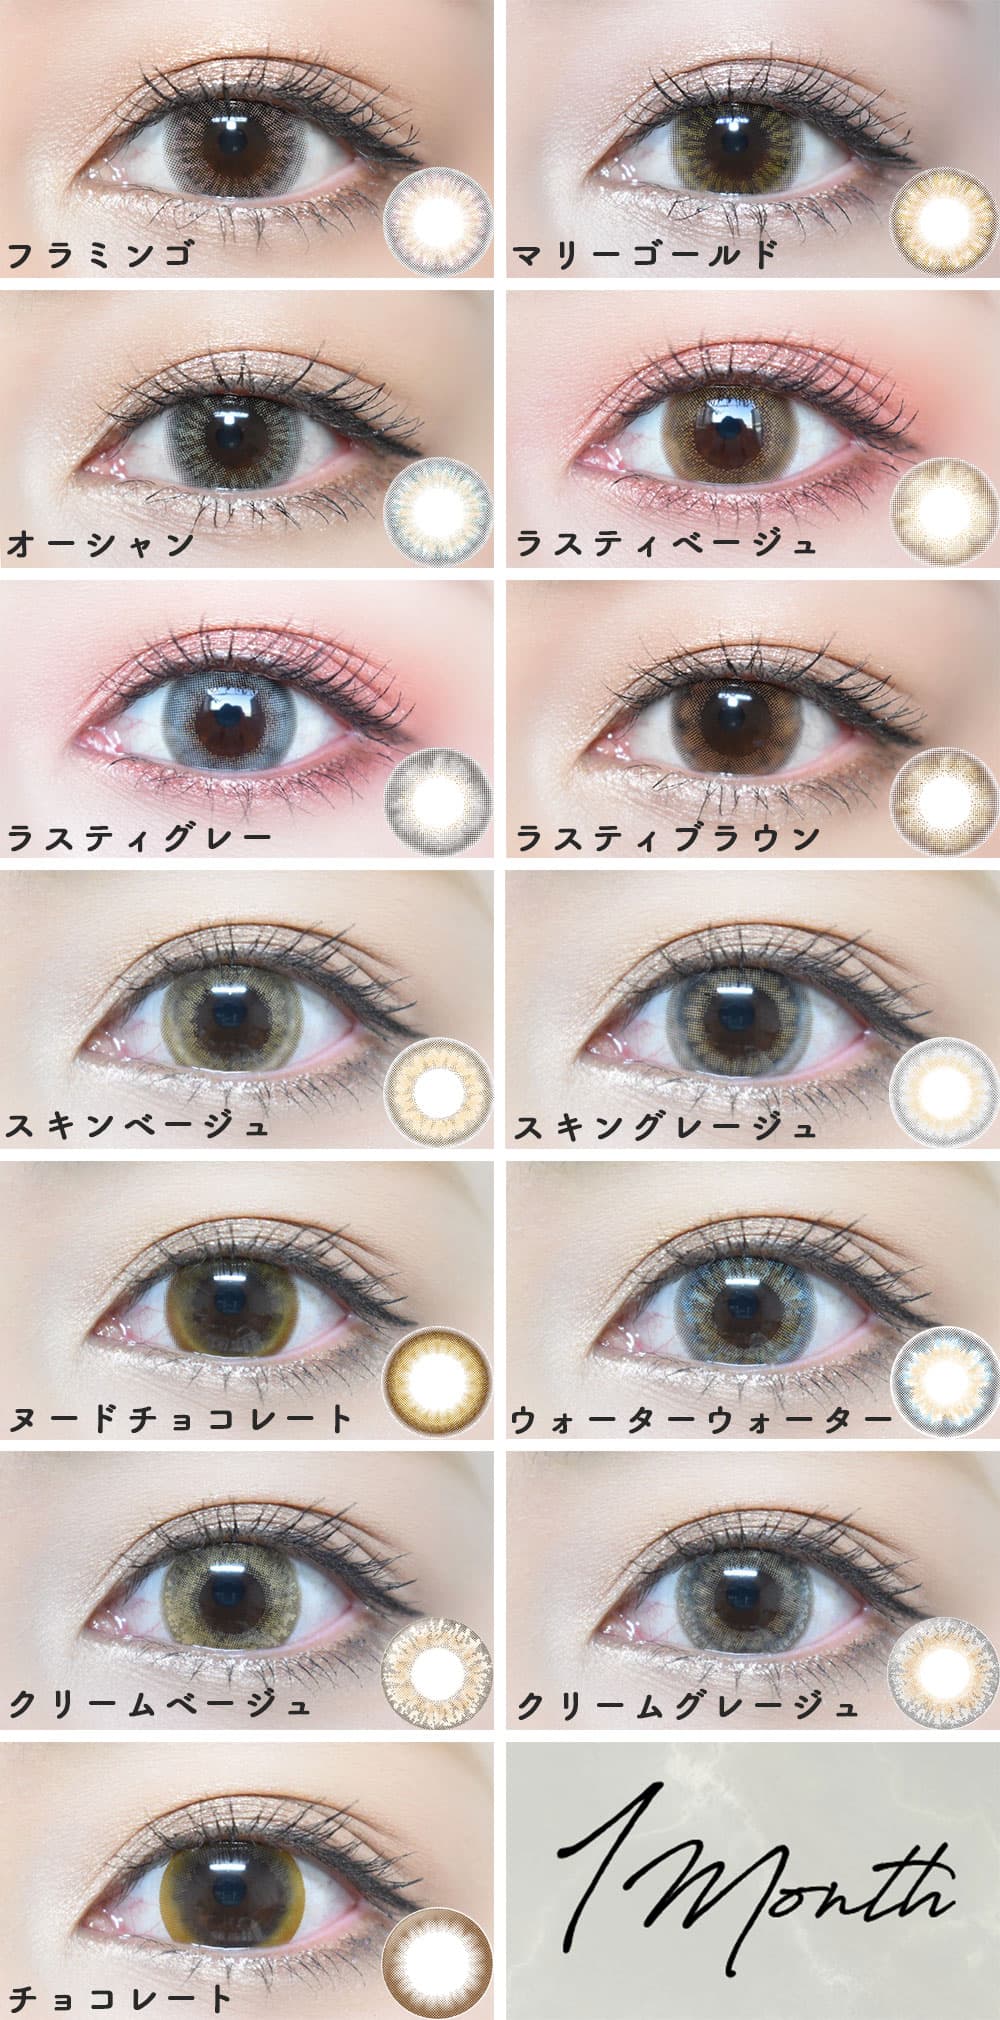 LILMOON(リルムーン)[14.5mm/1month/2枚/度なし] LILMOON LILY ANNA リリーアンナ | 人気カラコン LILMOON feliamo公式通販 | 度あり・度なし全商品送料無料！